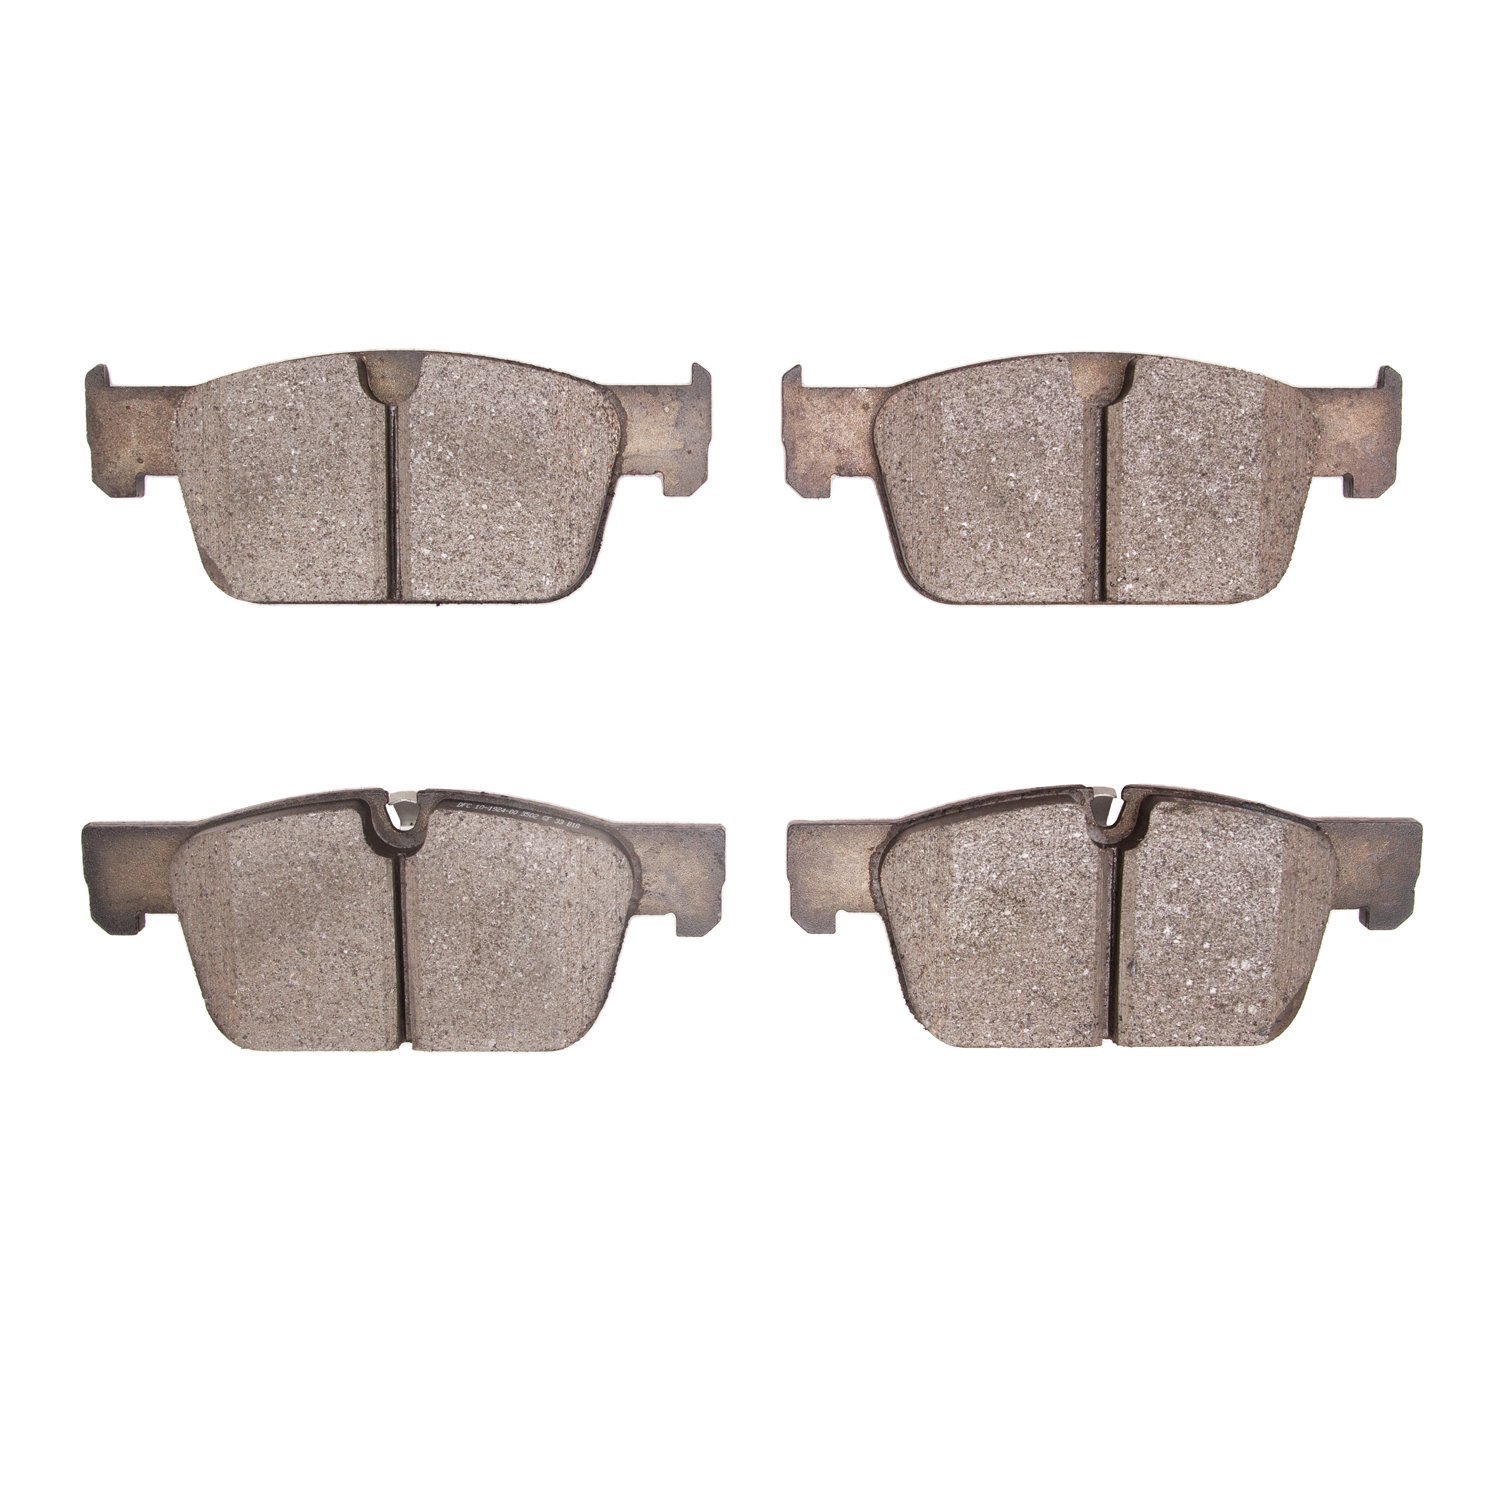 Euro Ceramic Brake Pads, Fits Select Volvo, Position: Front